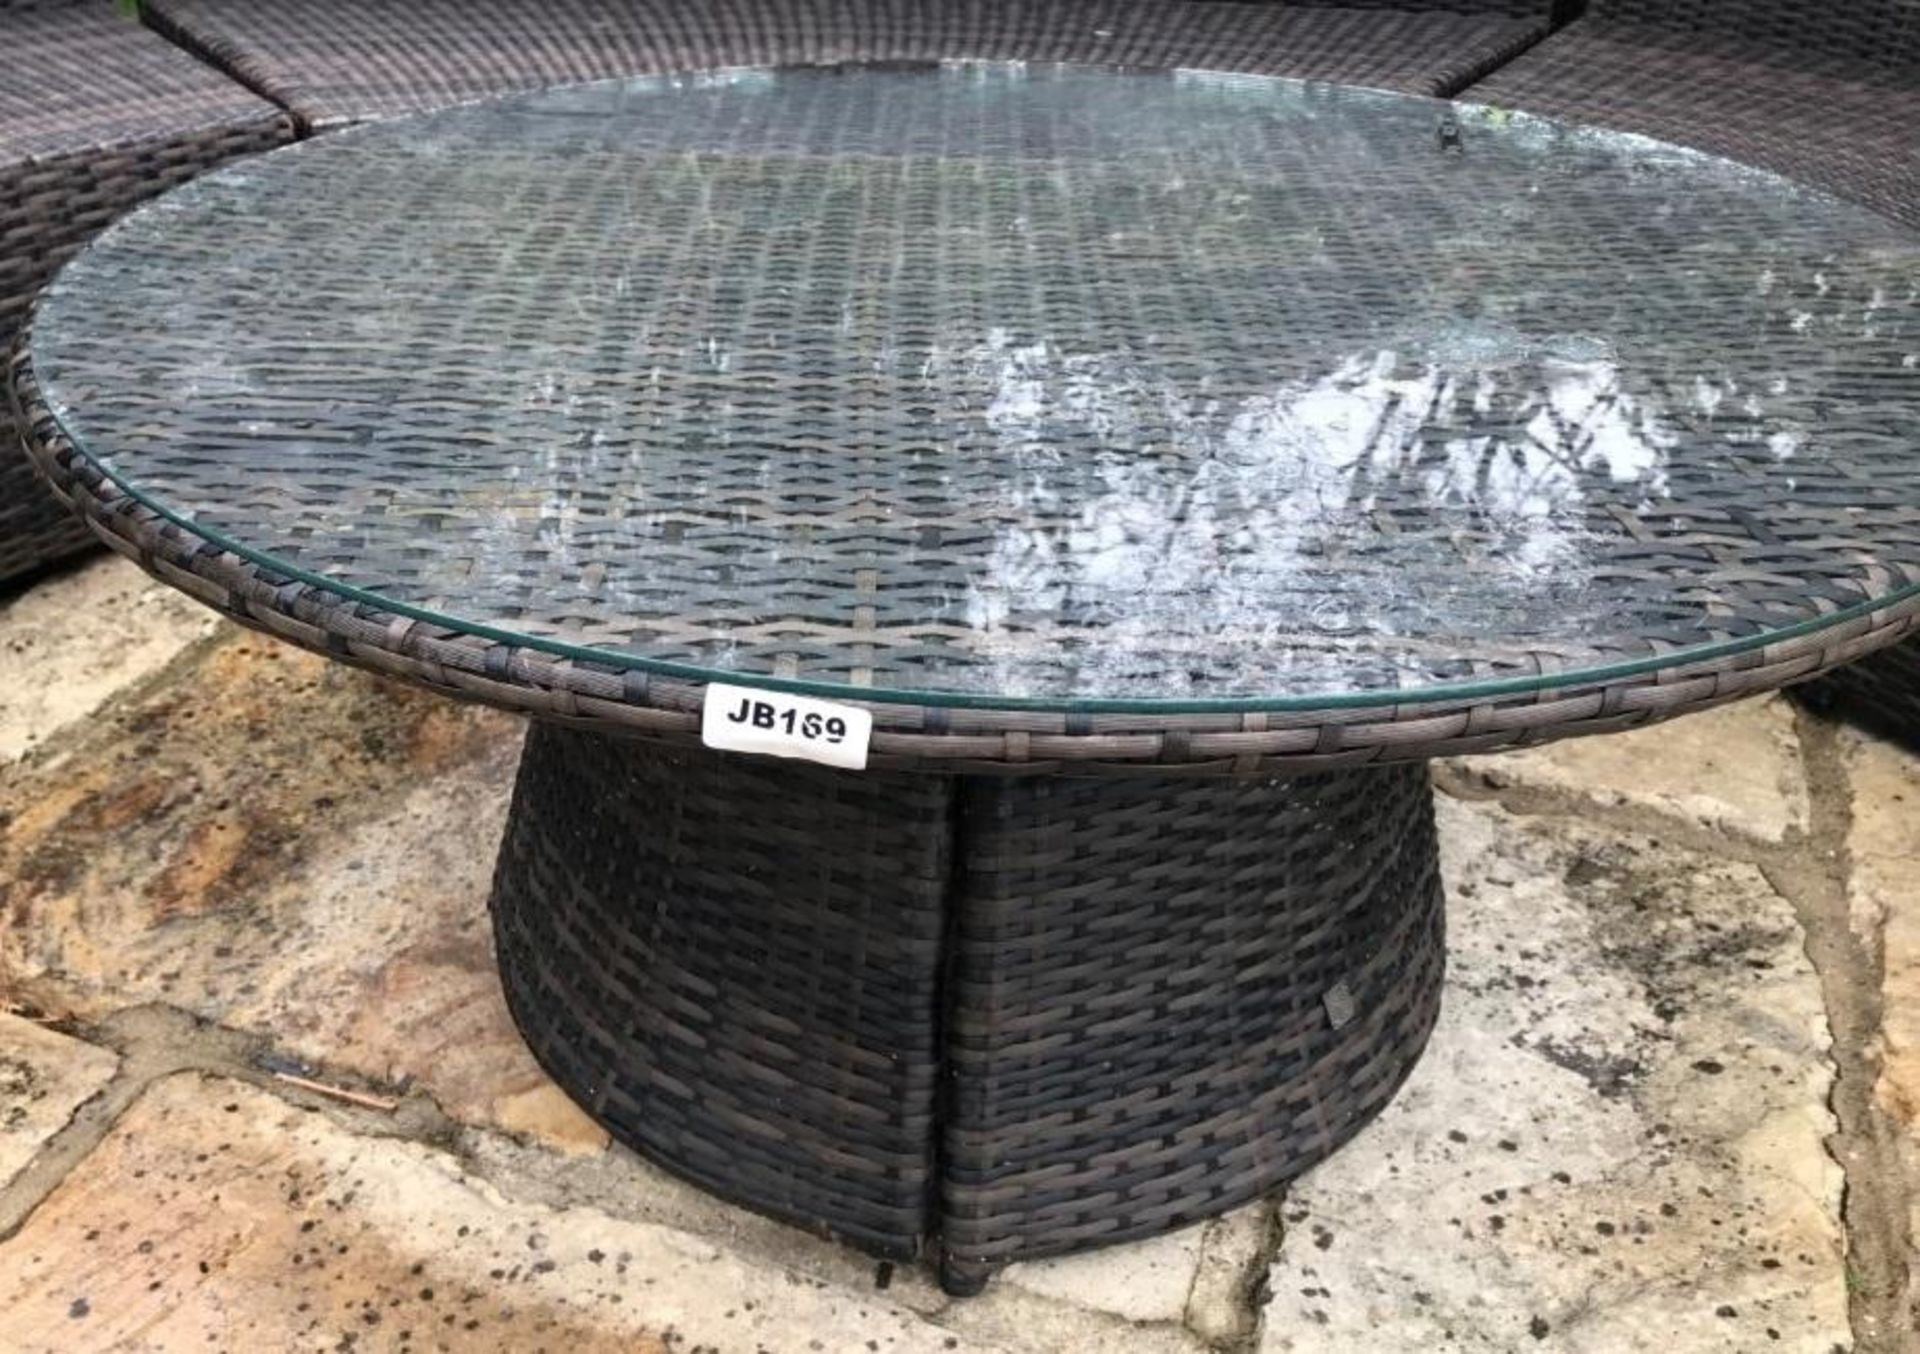 1 x Kensington Wicker/Rattan Round Glass Topped Lounge Table - Ref: JB169 - Pre-Owned - NO VAT ON - Image 3 of 3